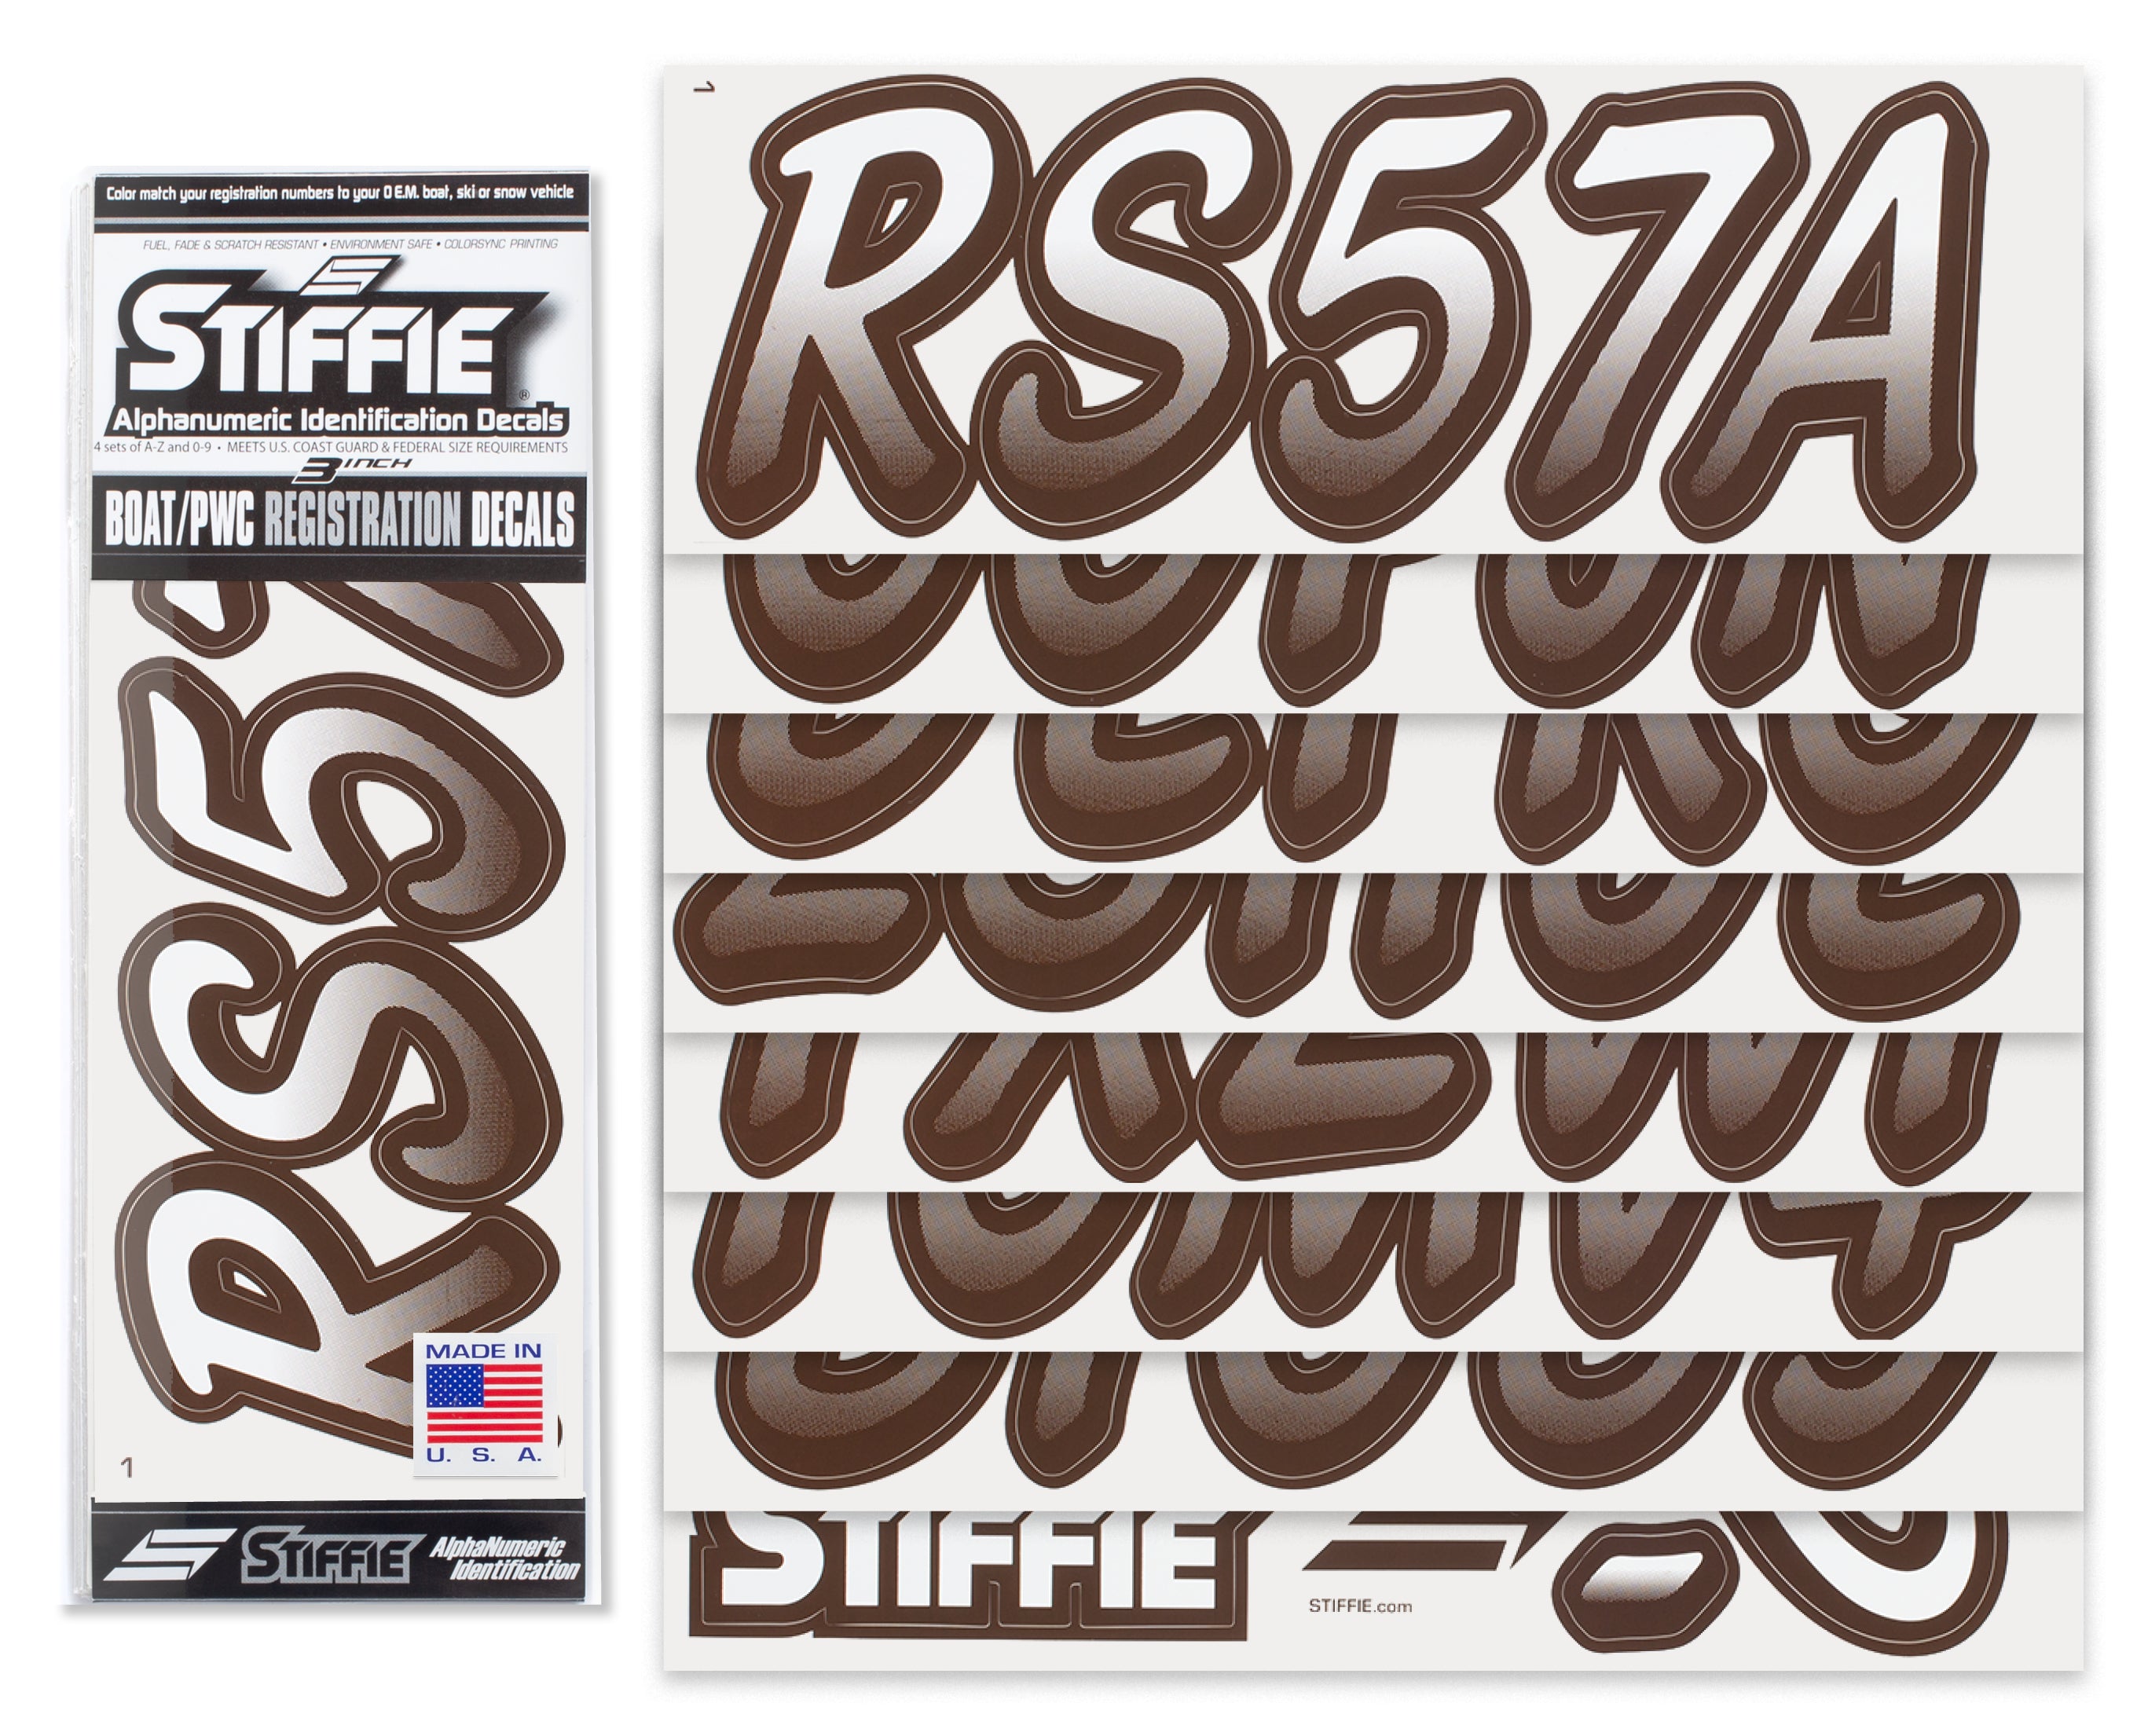 STIFFIE Whipline White /Espresso Brown 3" Alpha-Numeric Registration Identification Numbers Stickers Decals for Boats & Personal Watercraft